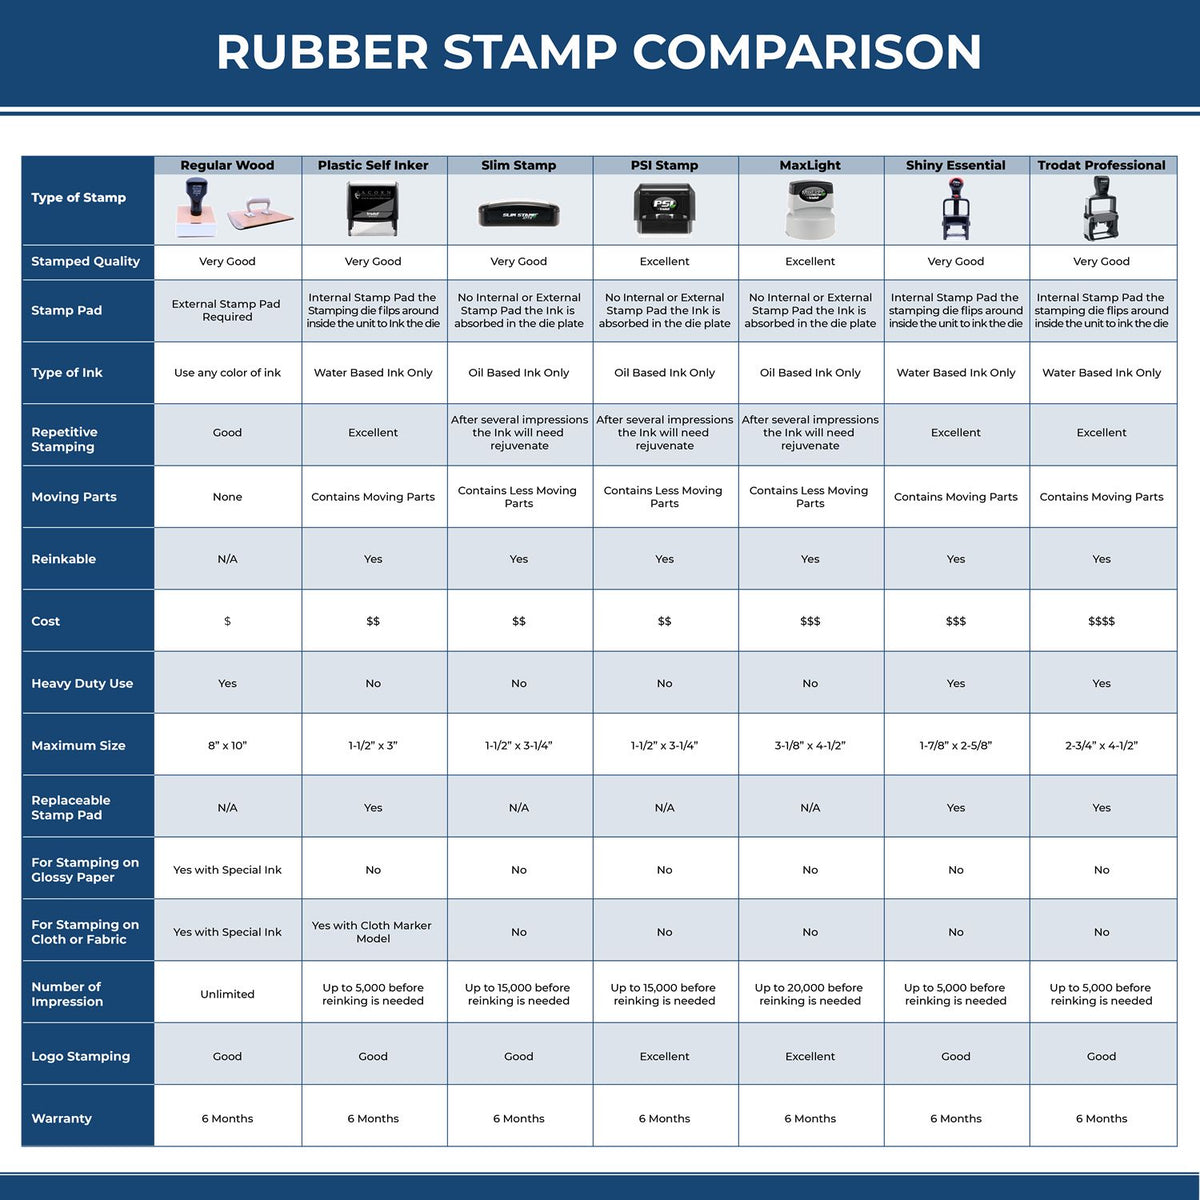 A comparison chart for the different types of mount models available for the PSI West Virginia Notary Stamp.